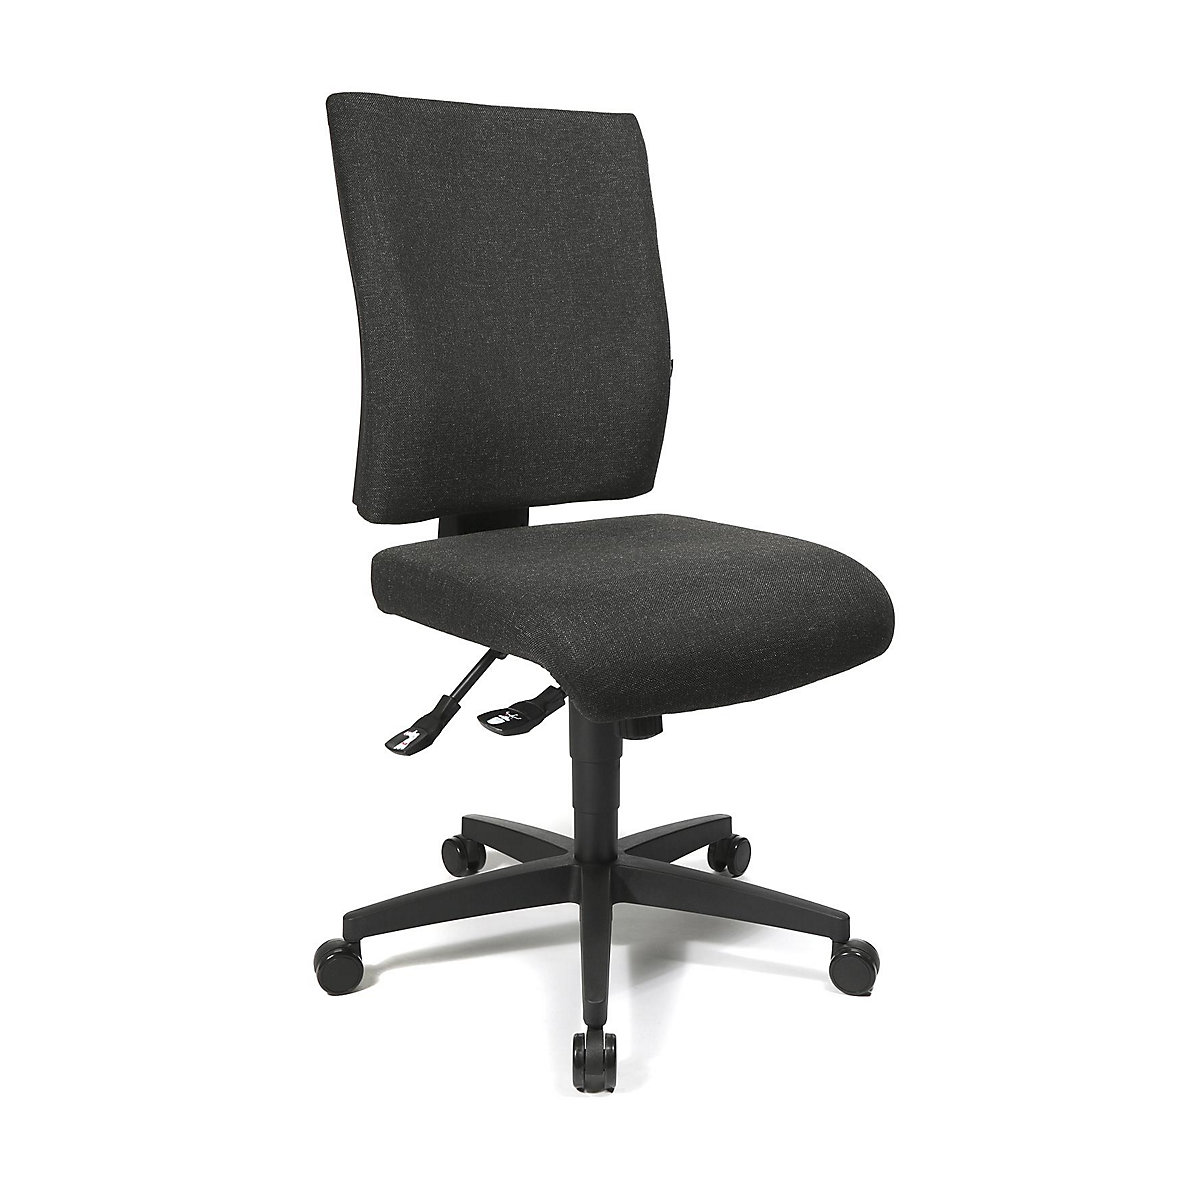 COMFORT office swivel chair – Topstar, height adjustable back rest, charcoal cover-26